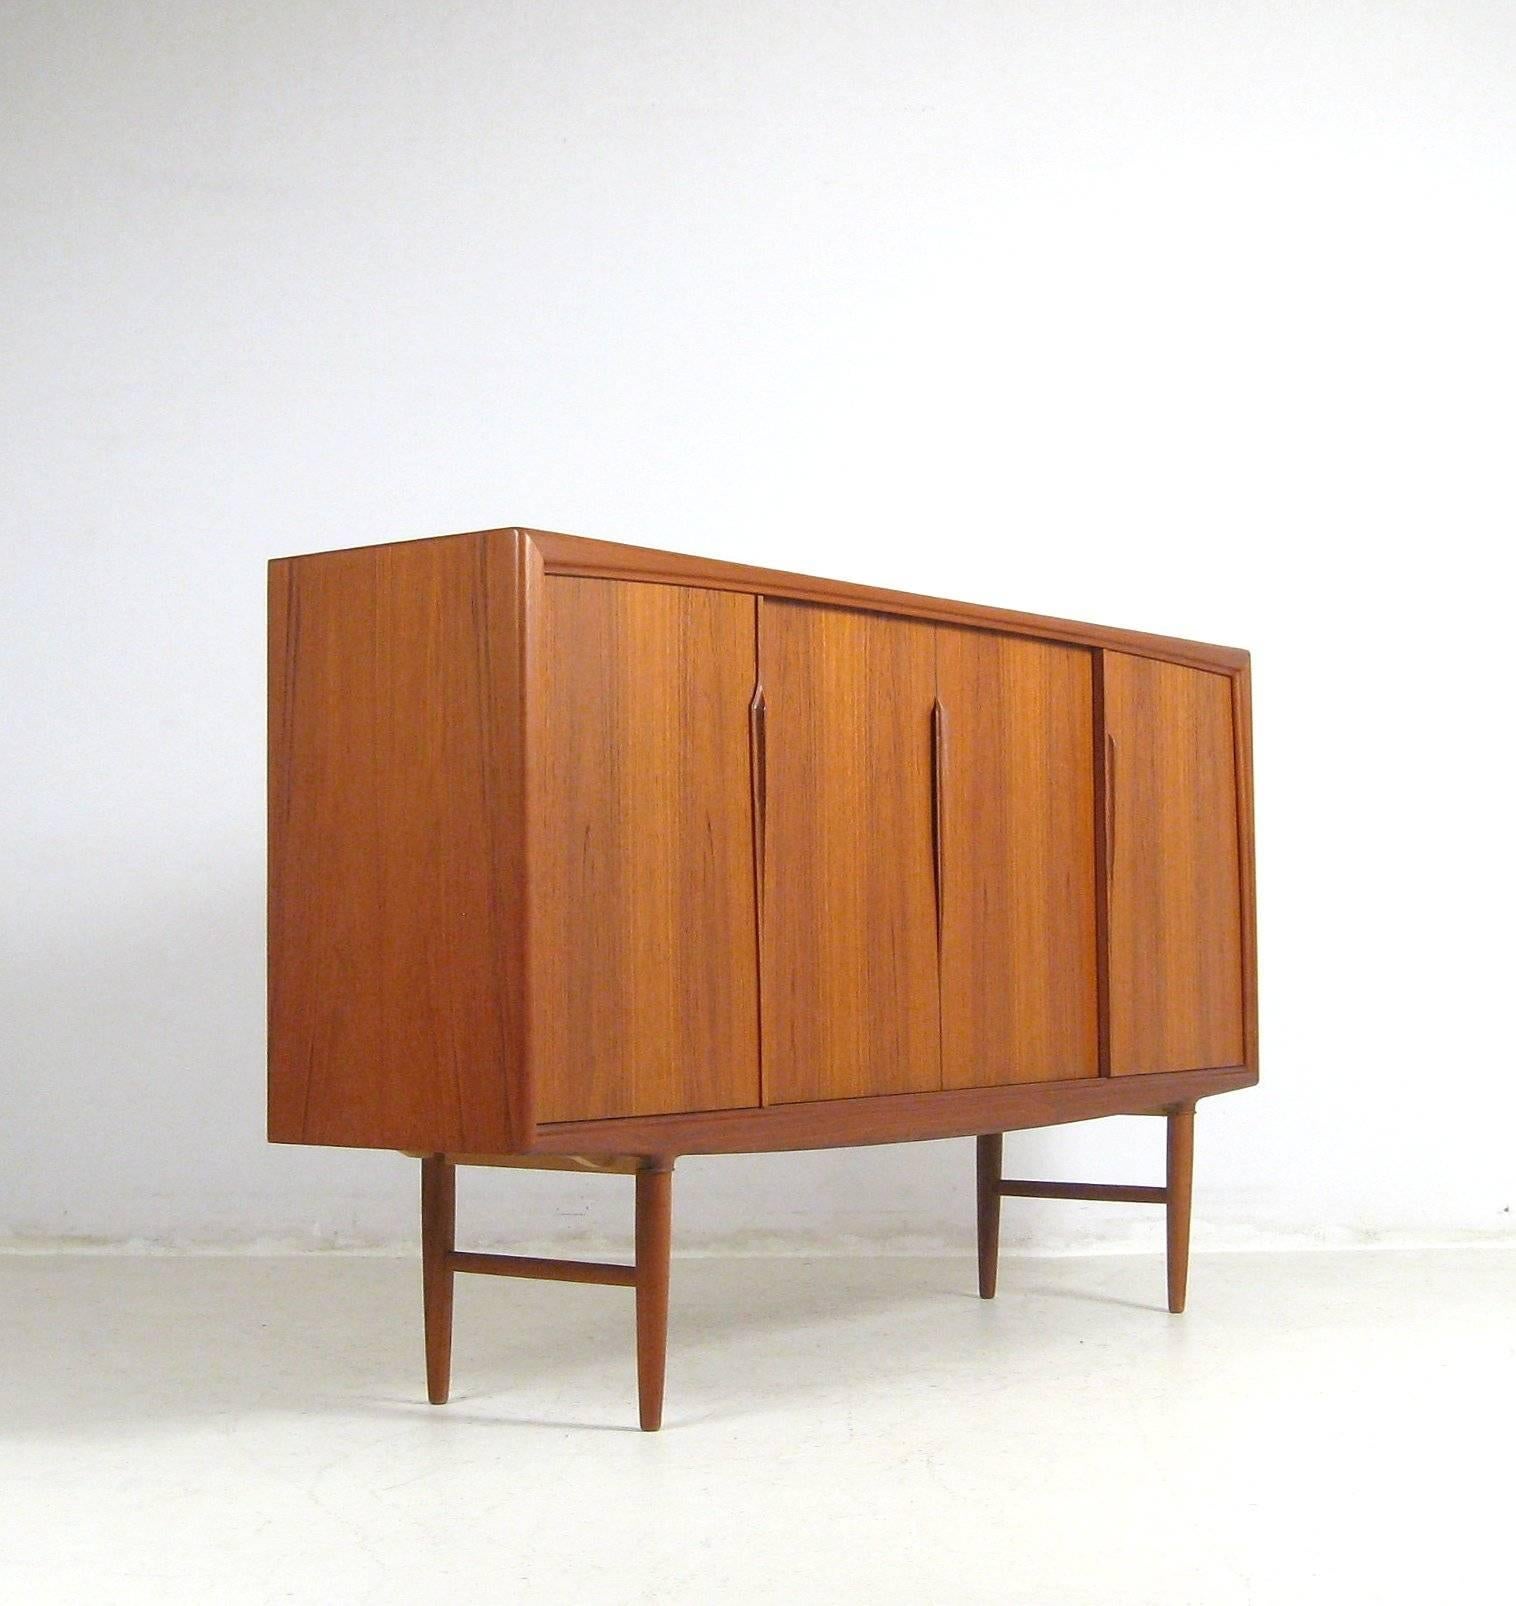 Large teak sideboard/credenza from the 1960s.

Typically Danish, this is not only a wonderful looking unit it has a large amount of storage too. Function and style!

Four large sliding doors fitted with beautiful curled-back handles reveal